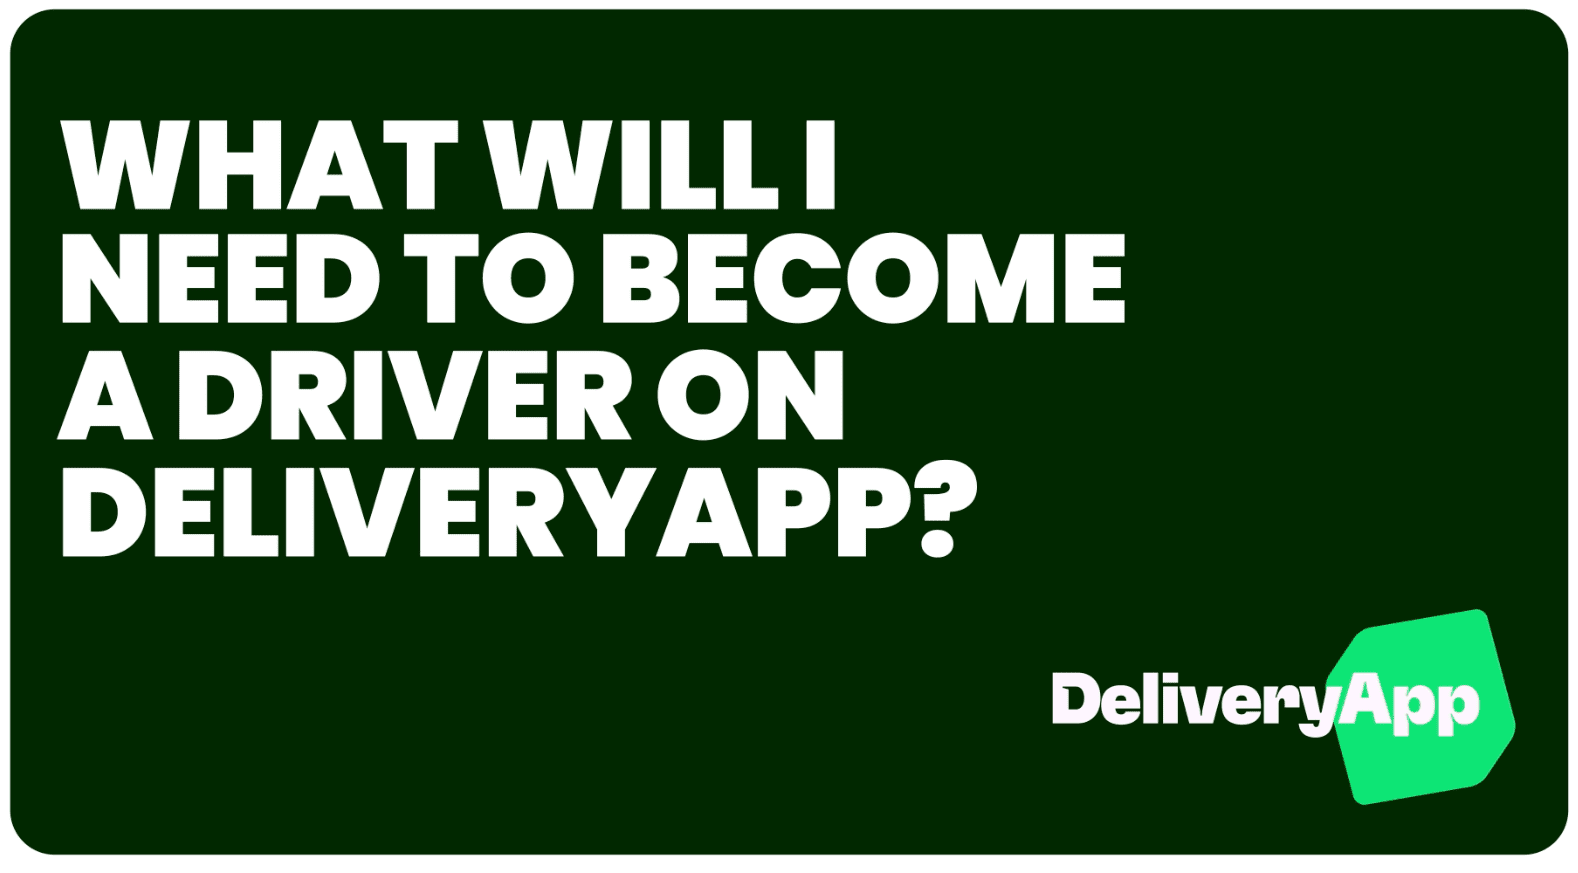 What will I need to become a driver on DeliveryApp?